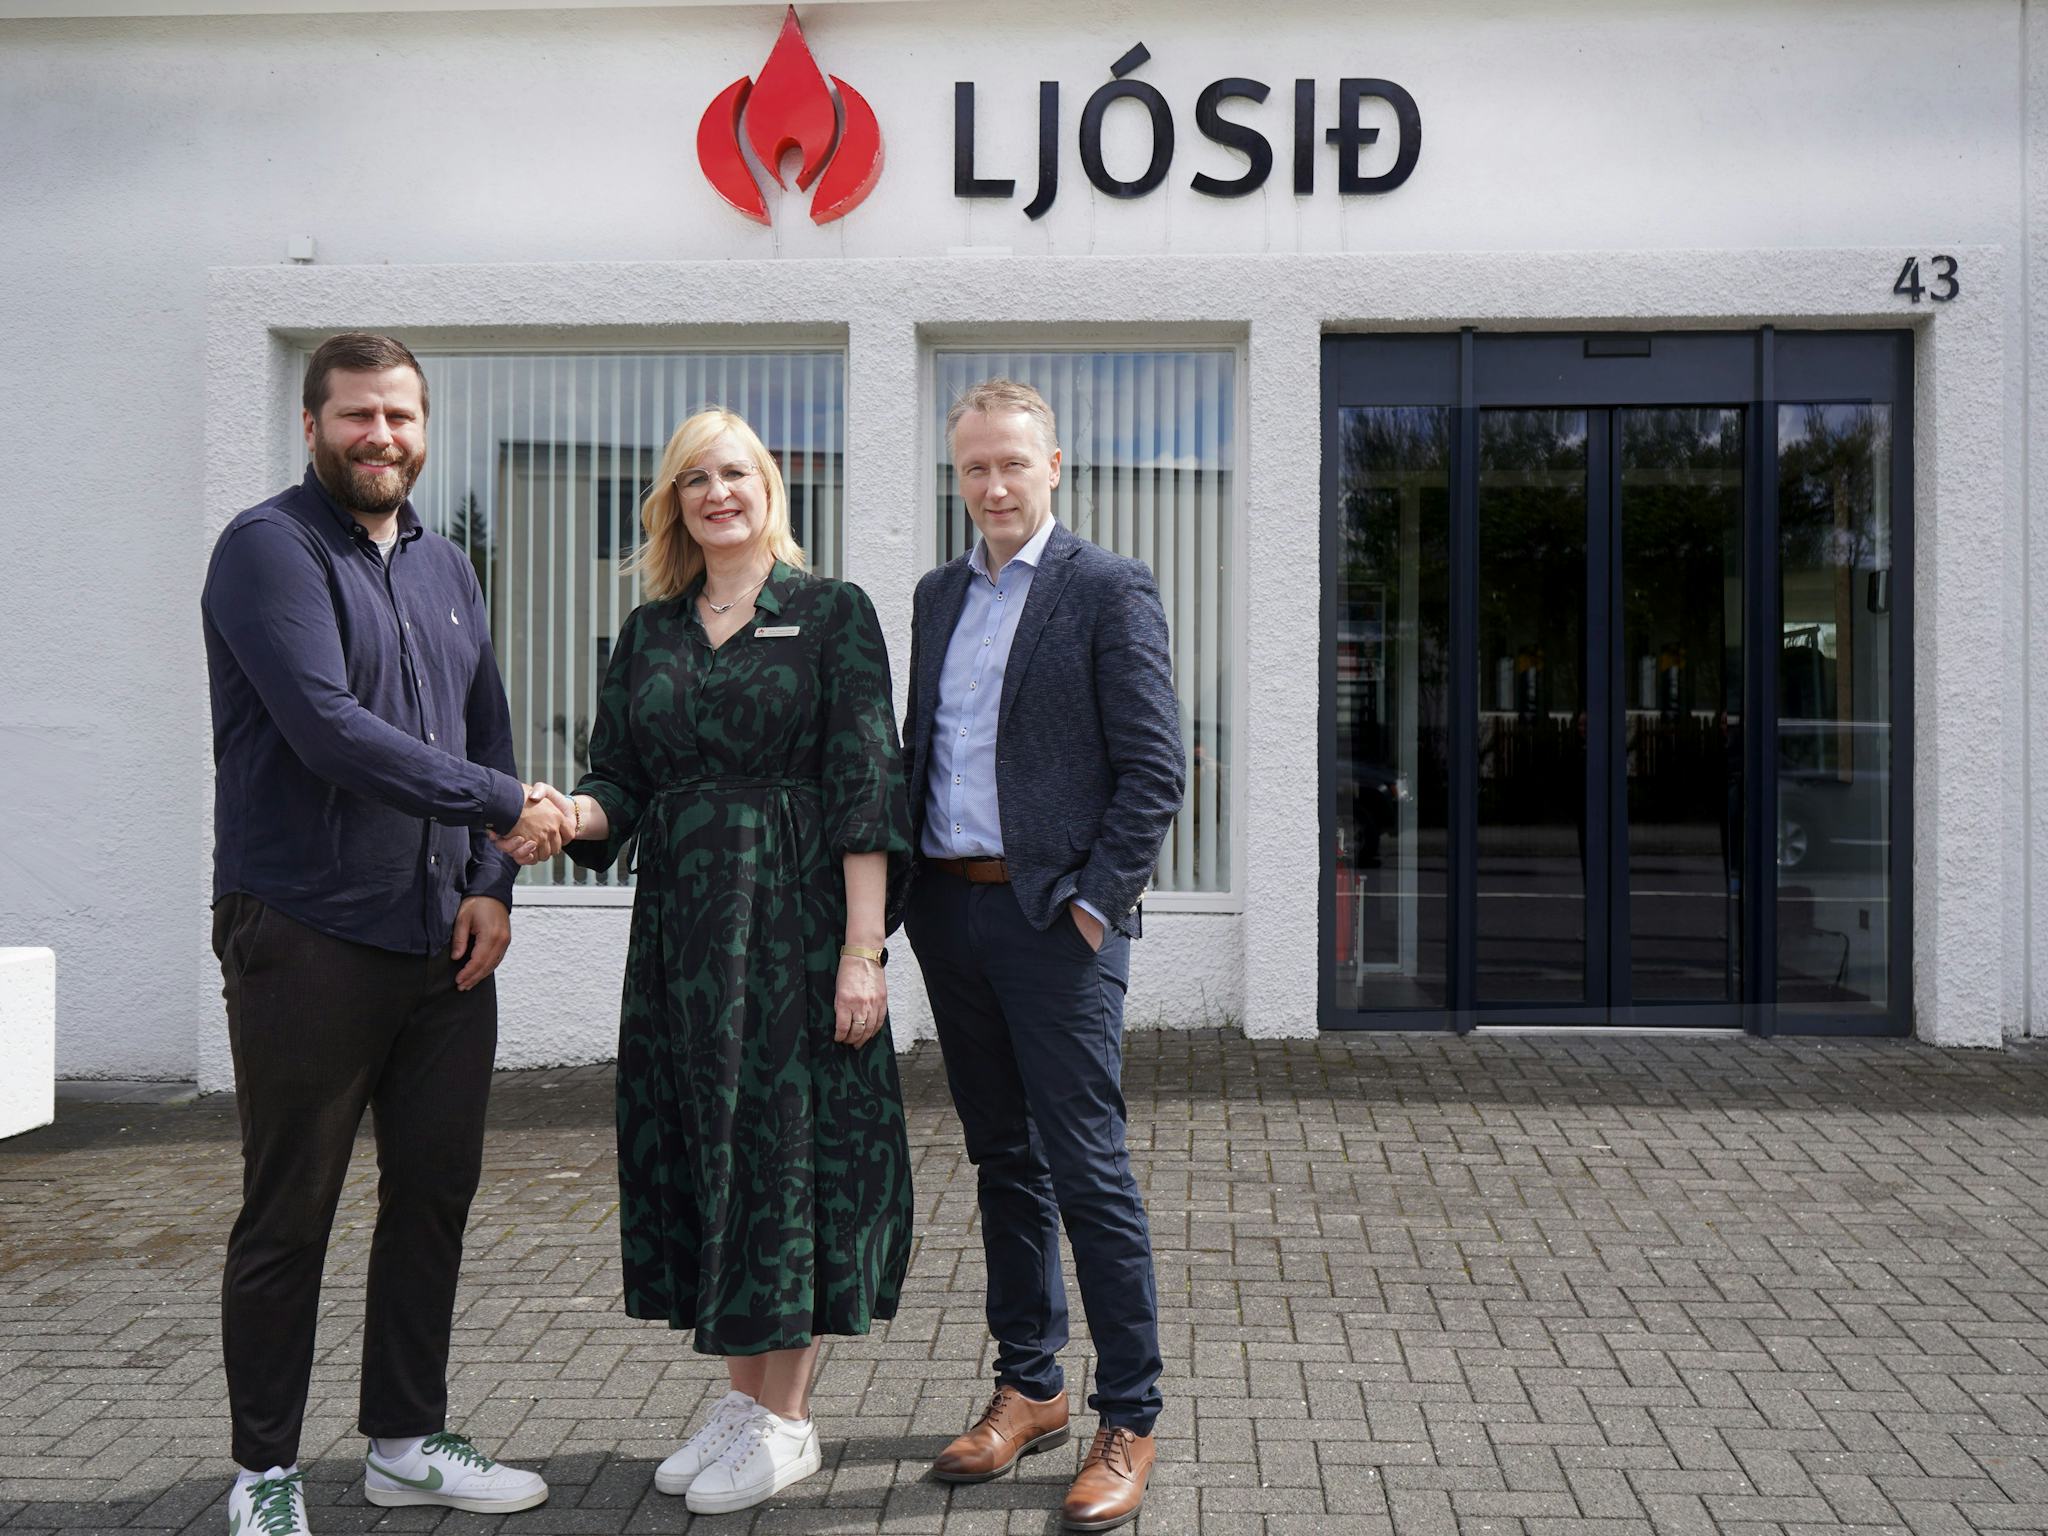 Three individuals standing together and shaking hands in front of a building with the sign "LJOSID"